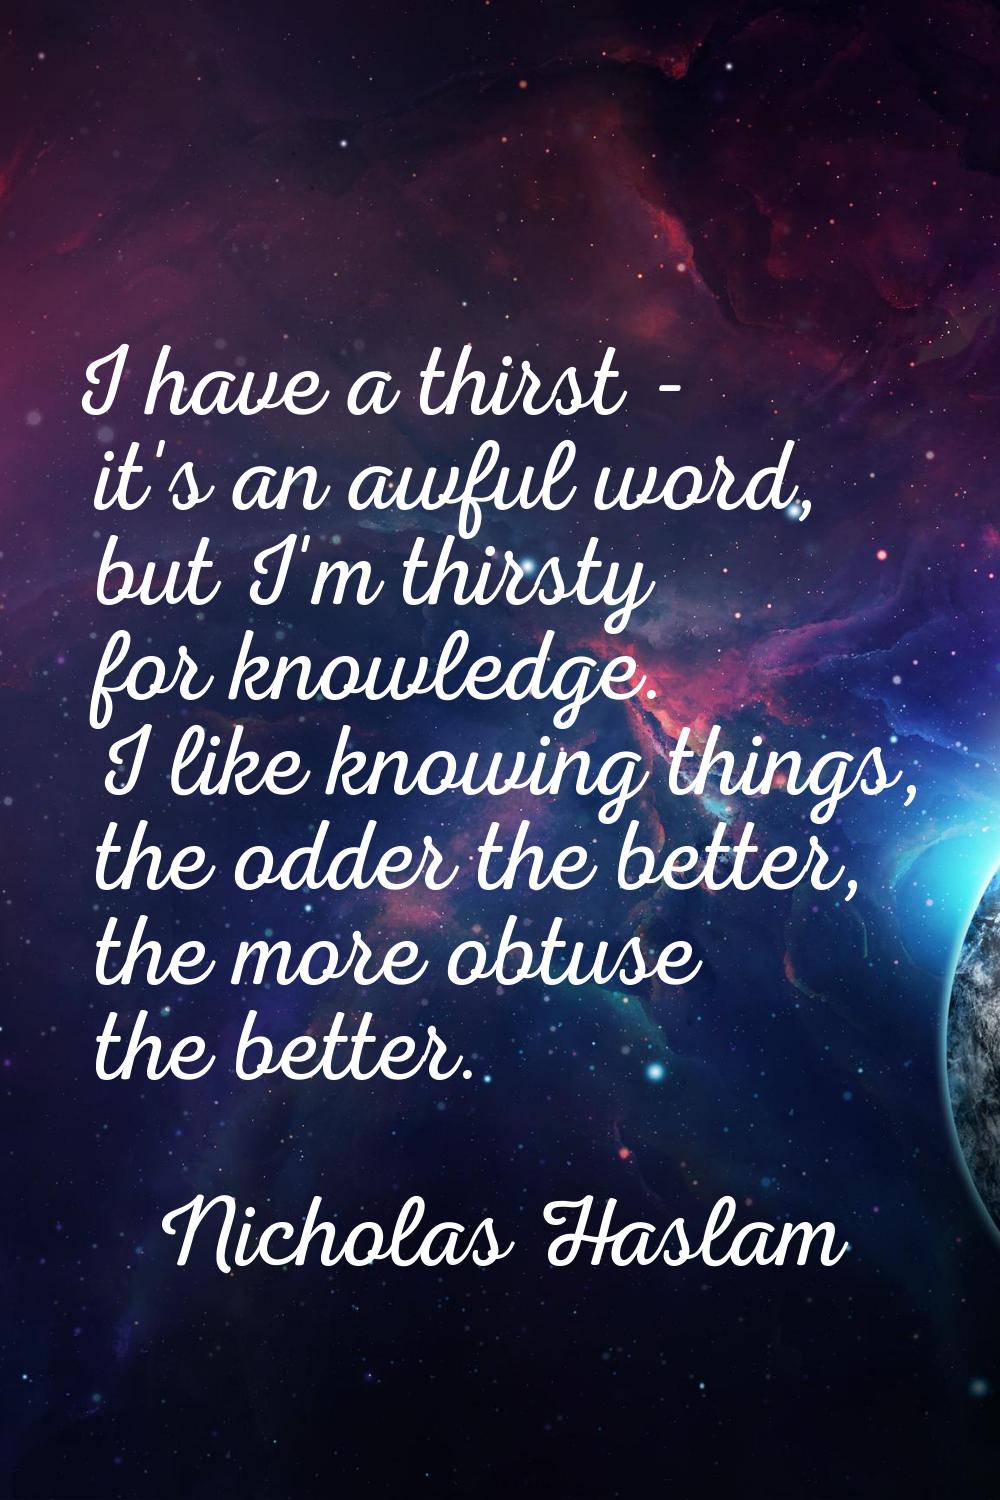 I have a thirst - it's an awful word, but I'm thirsty for knowledge. I like knowing things, the odd